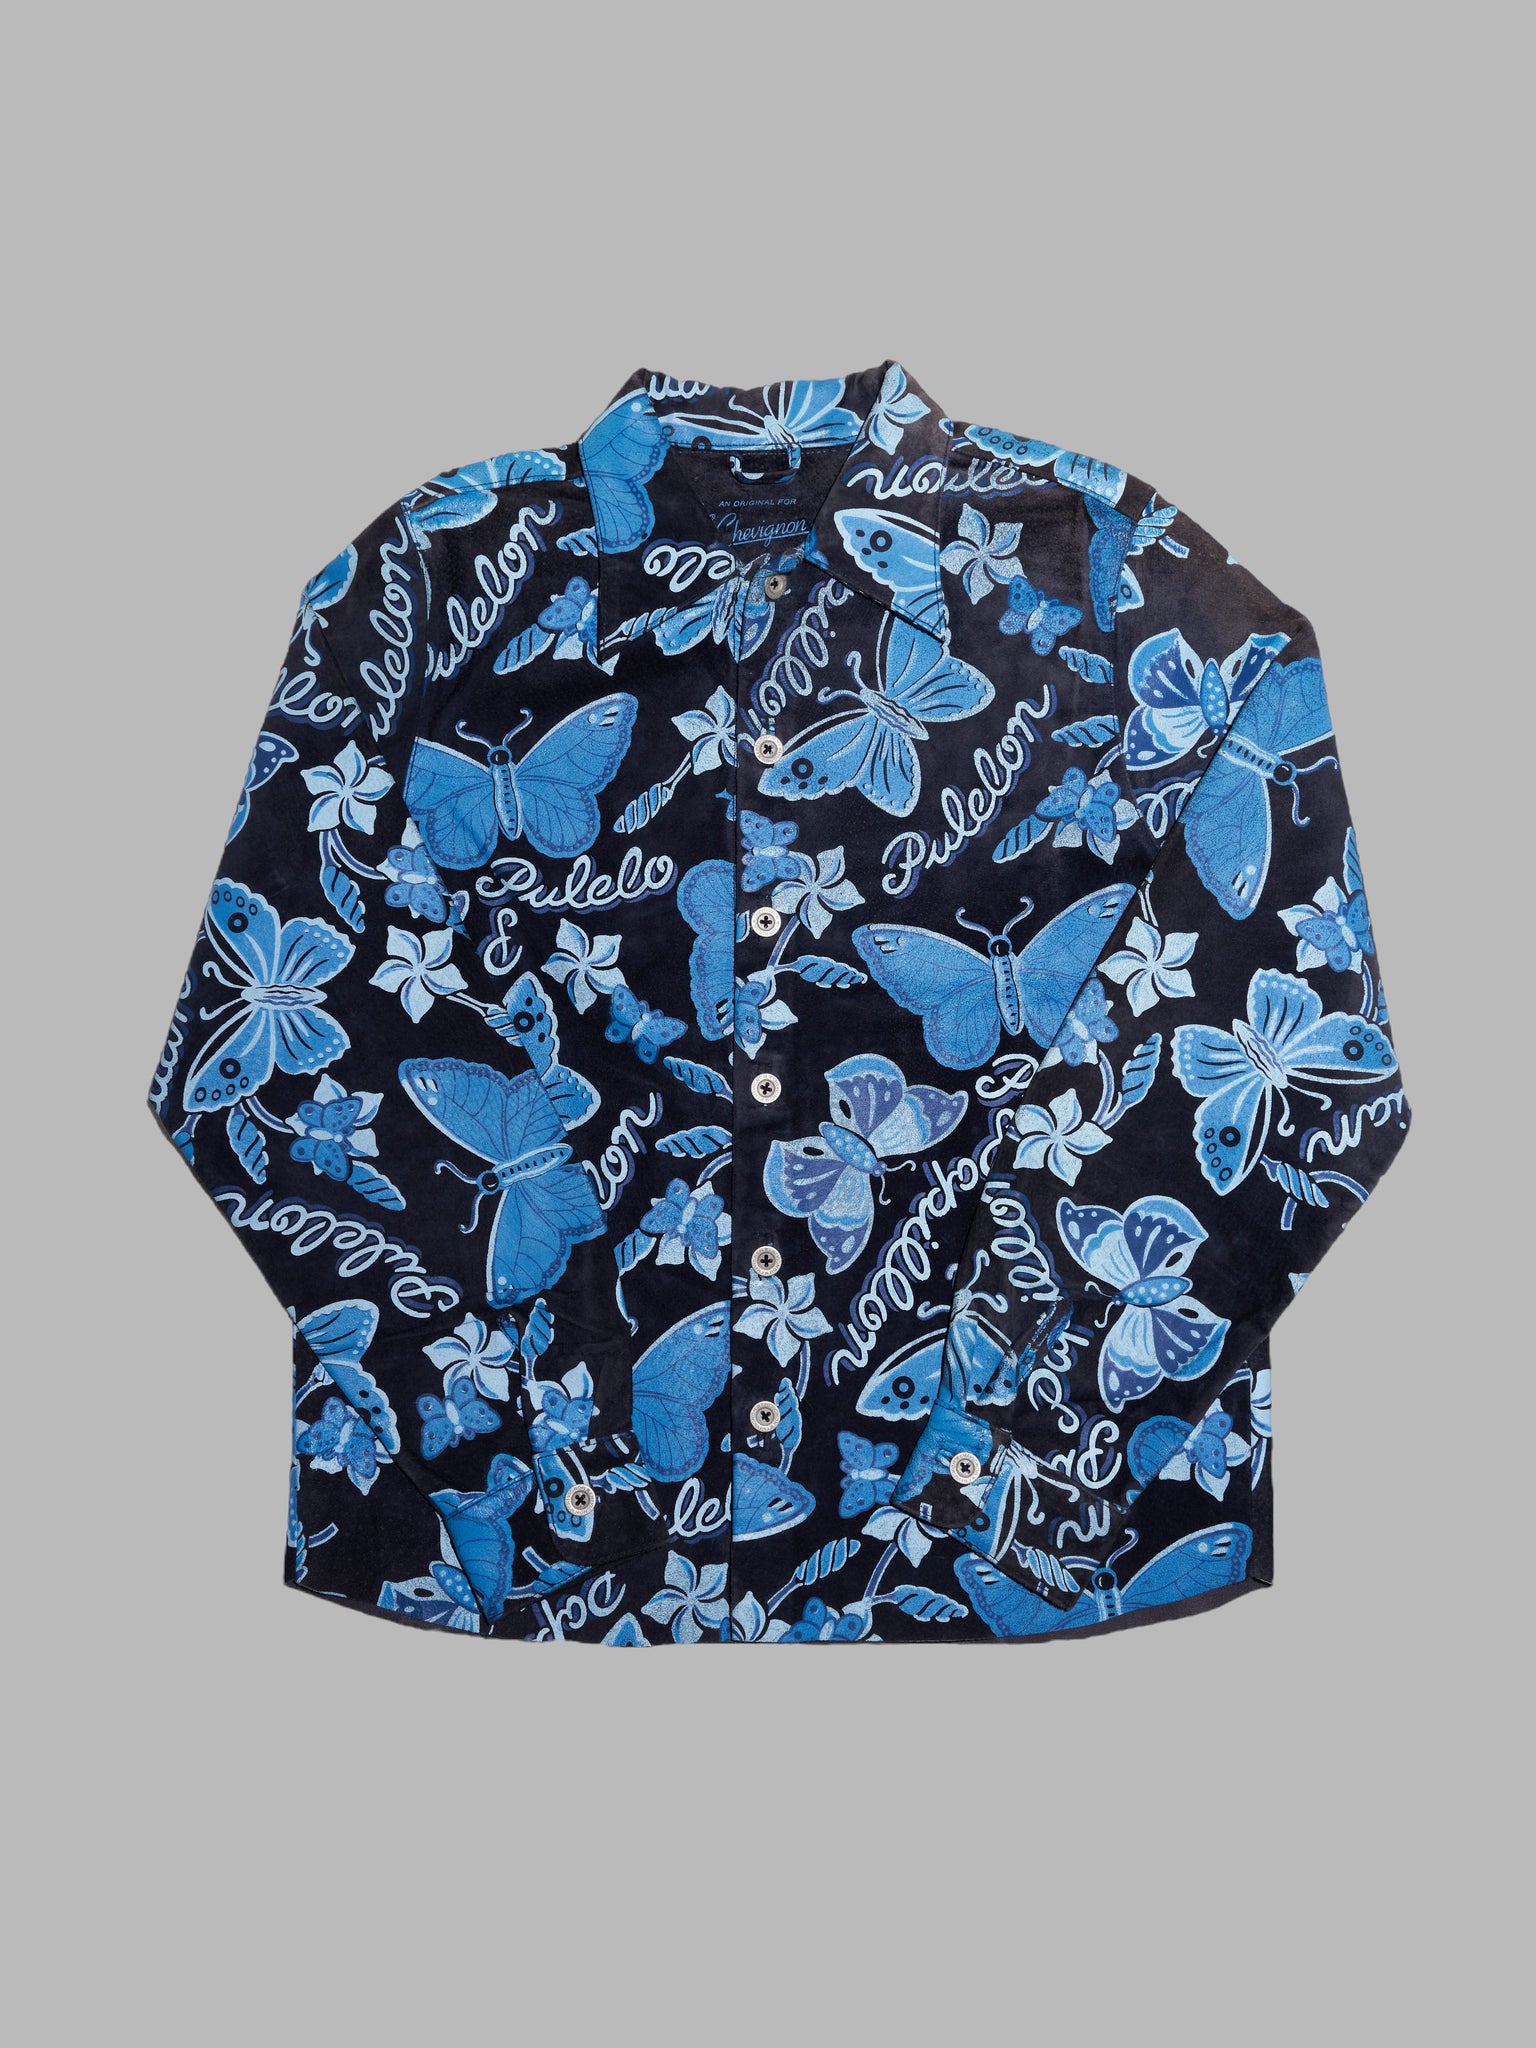 Chevignon Girl Print black and blue butterfly print leather shirt jacket - 38